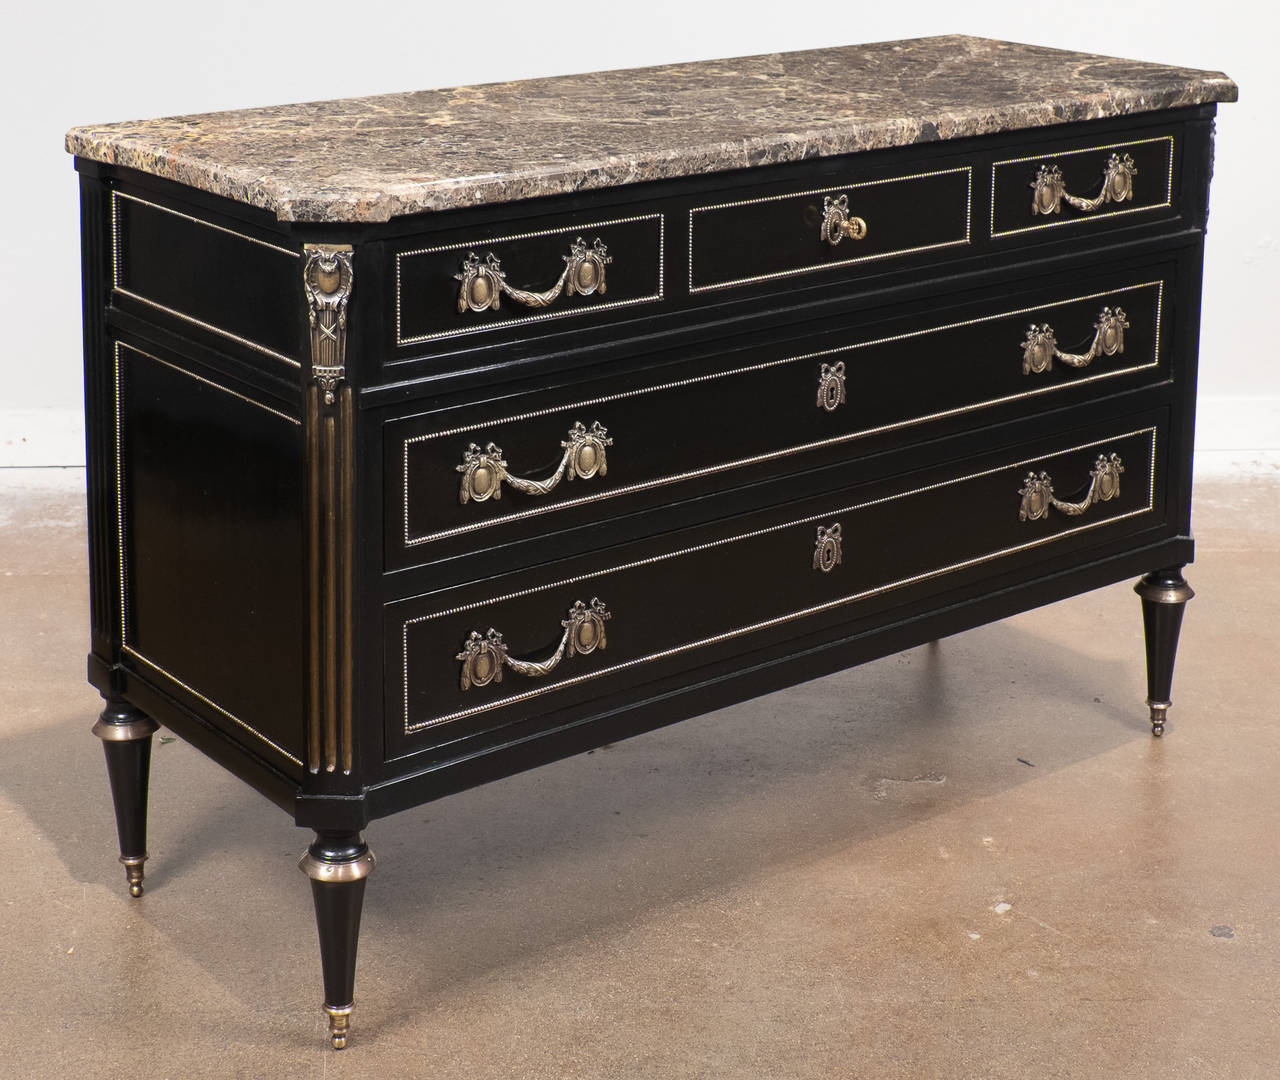 Cast French Louis XVI Ebonized Marble-Top Commode